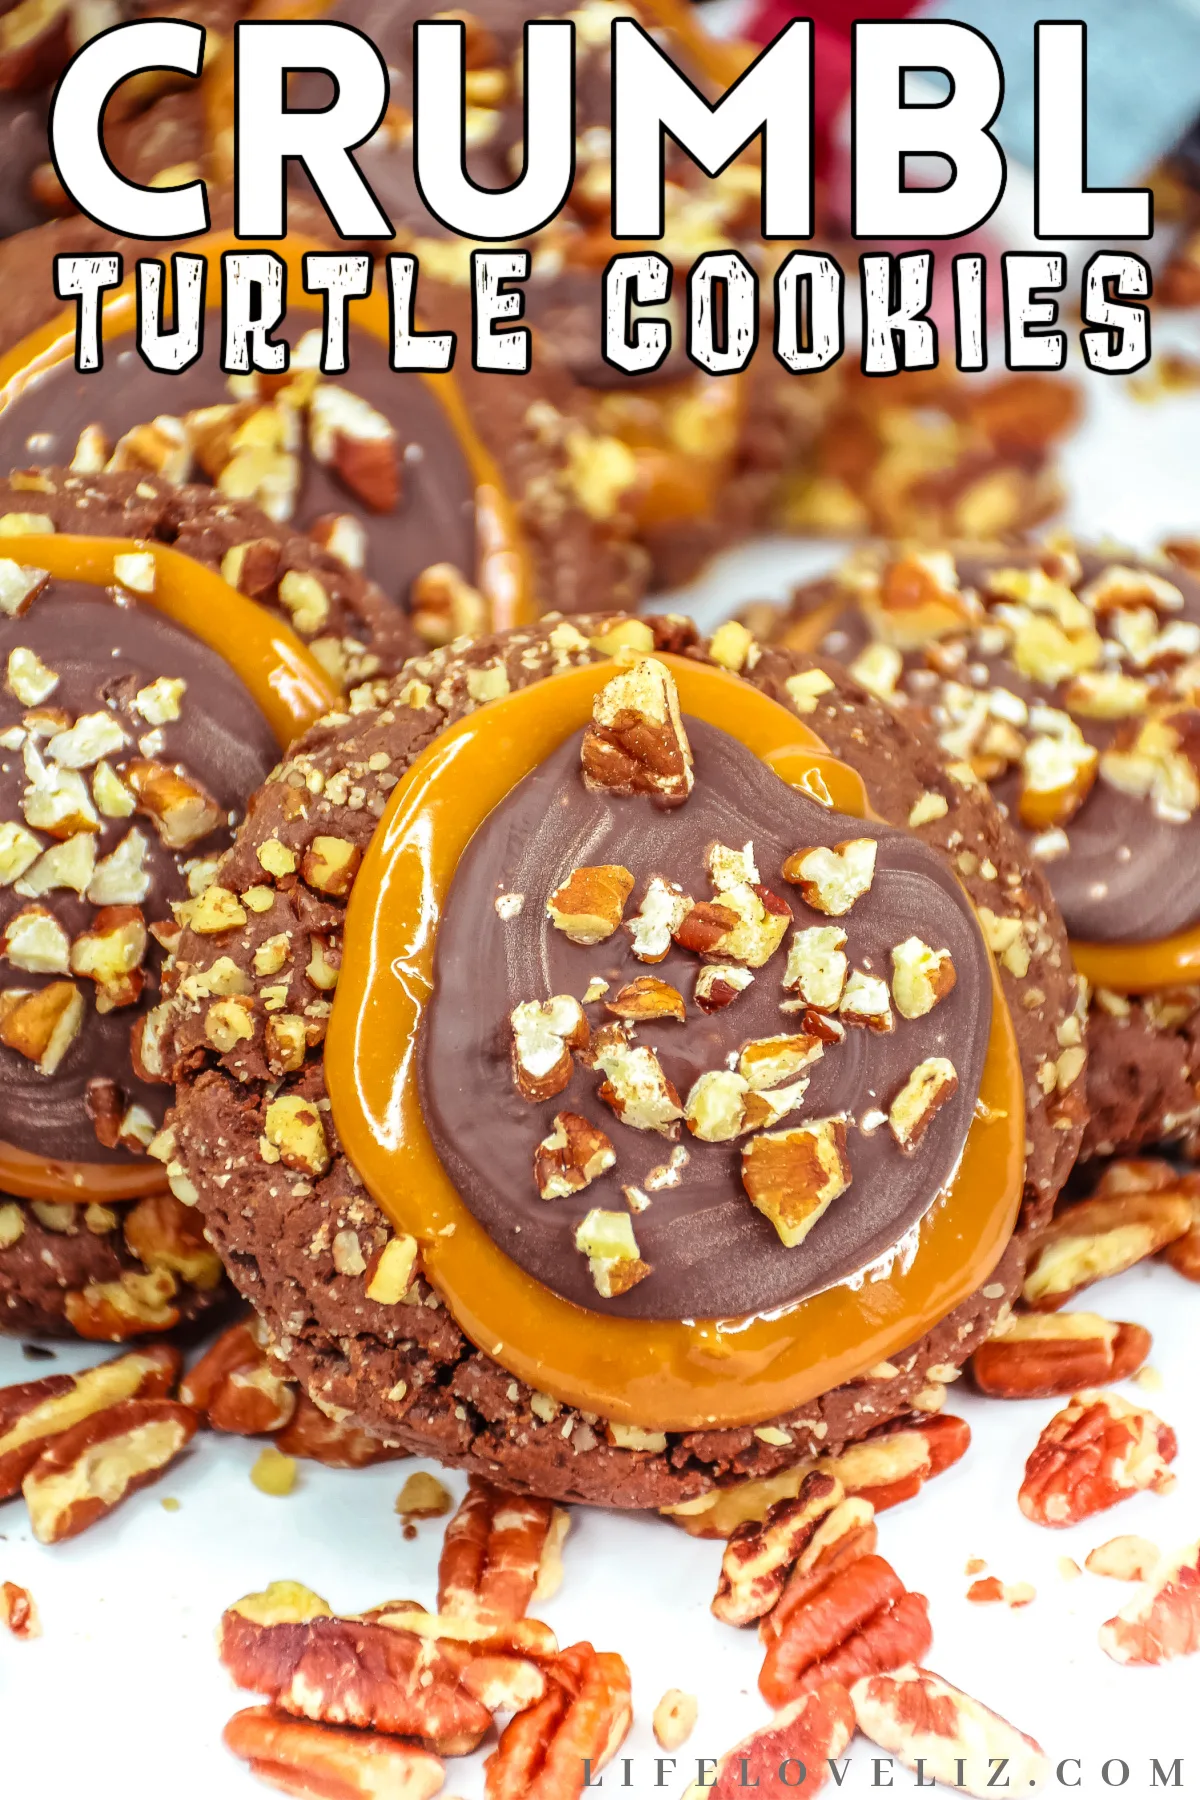 Try out this delicious and easy copycat Crumbl Turtle Cookies Recipe that is sure to be a hit with your family and friends!